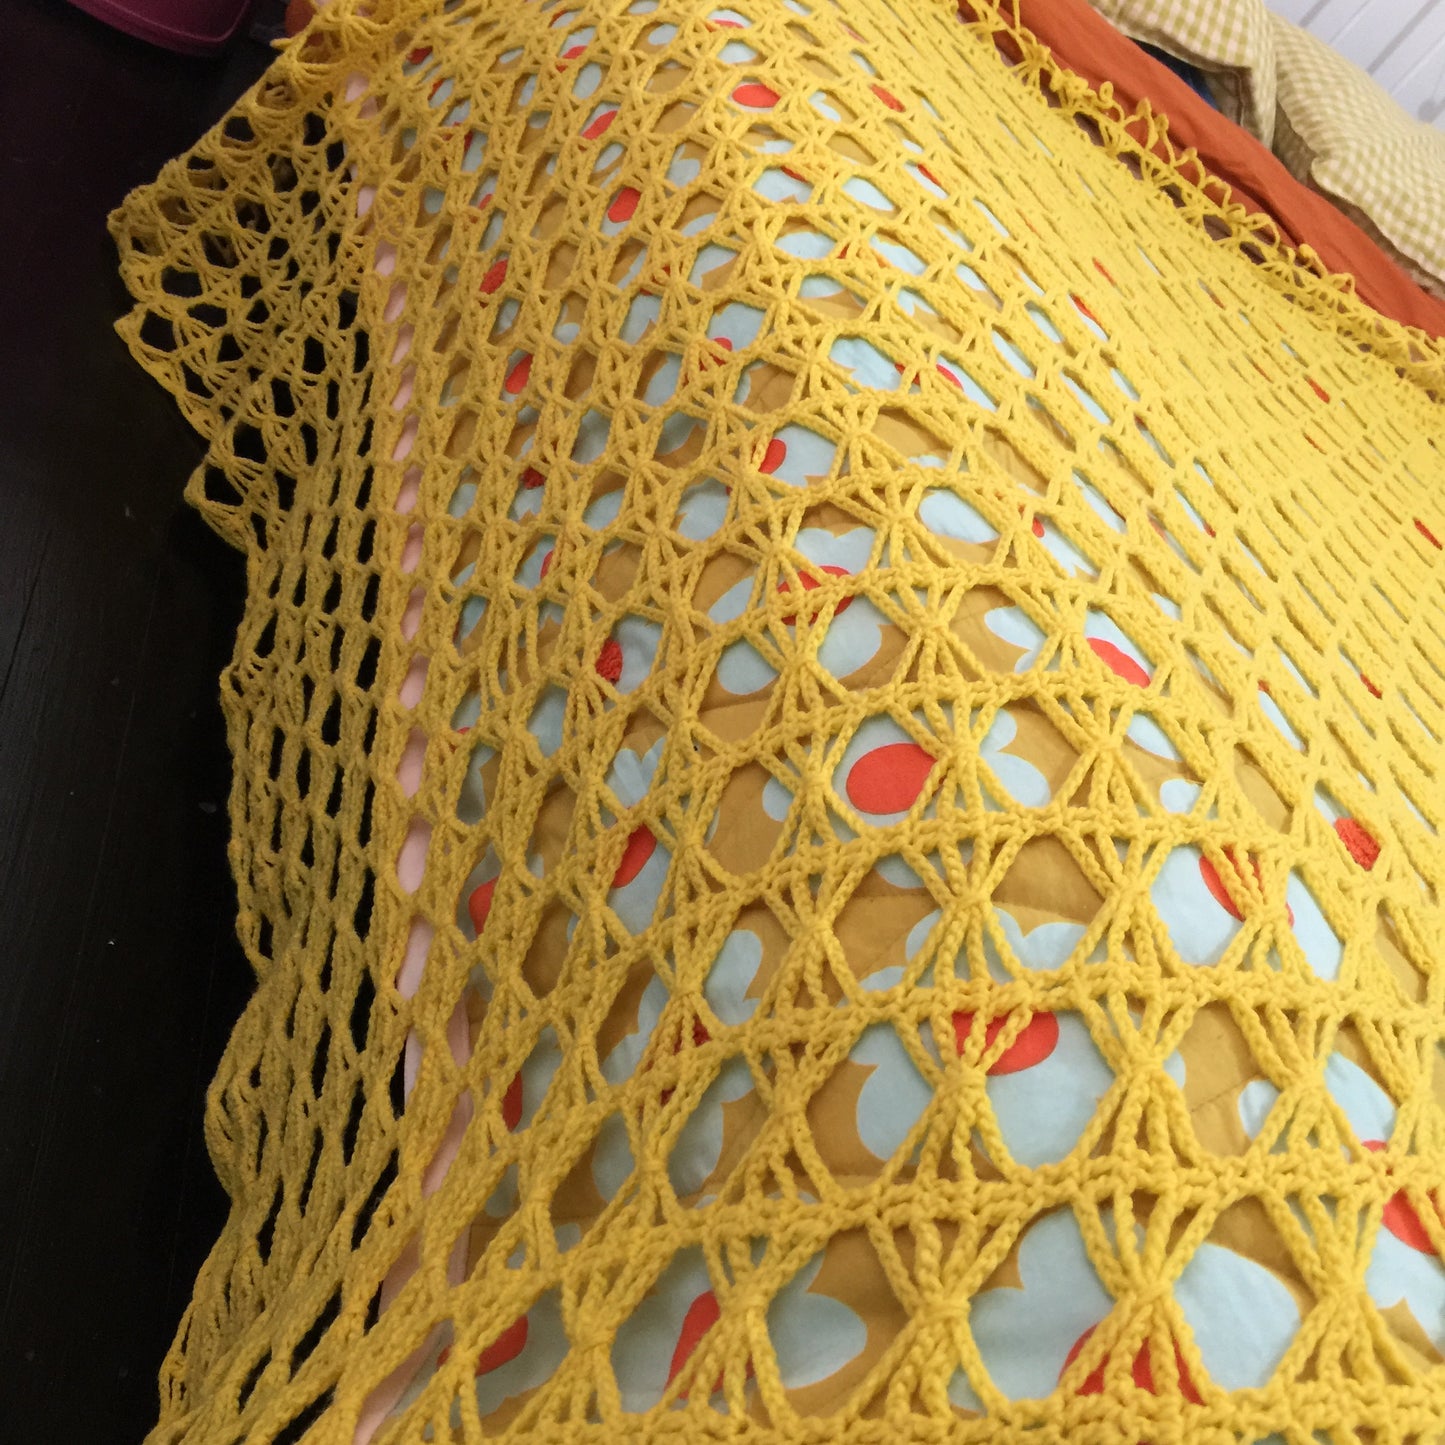 YELLOW Knitted Blanket Bed TOPPER Fun Childs Bedroom Rug Bedspread Vintage